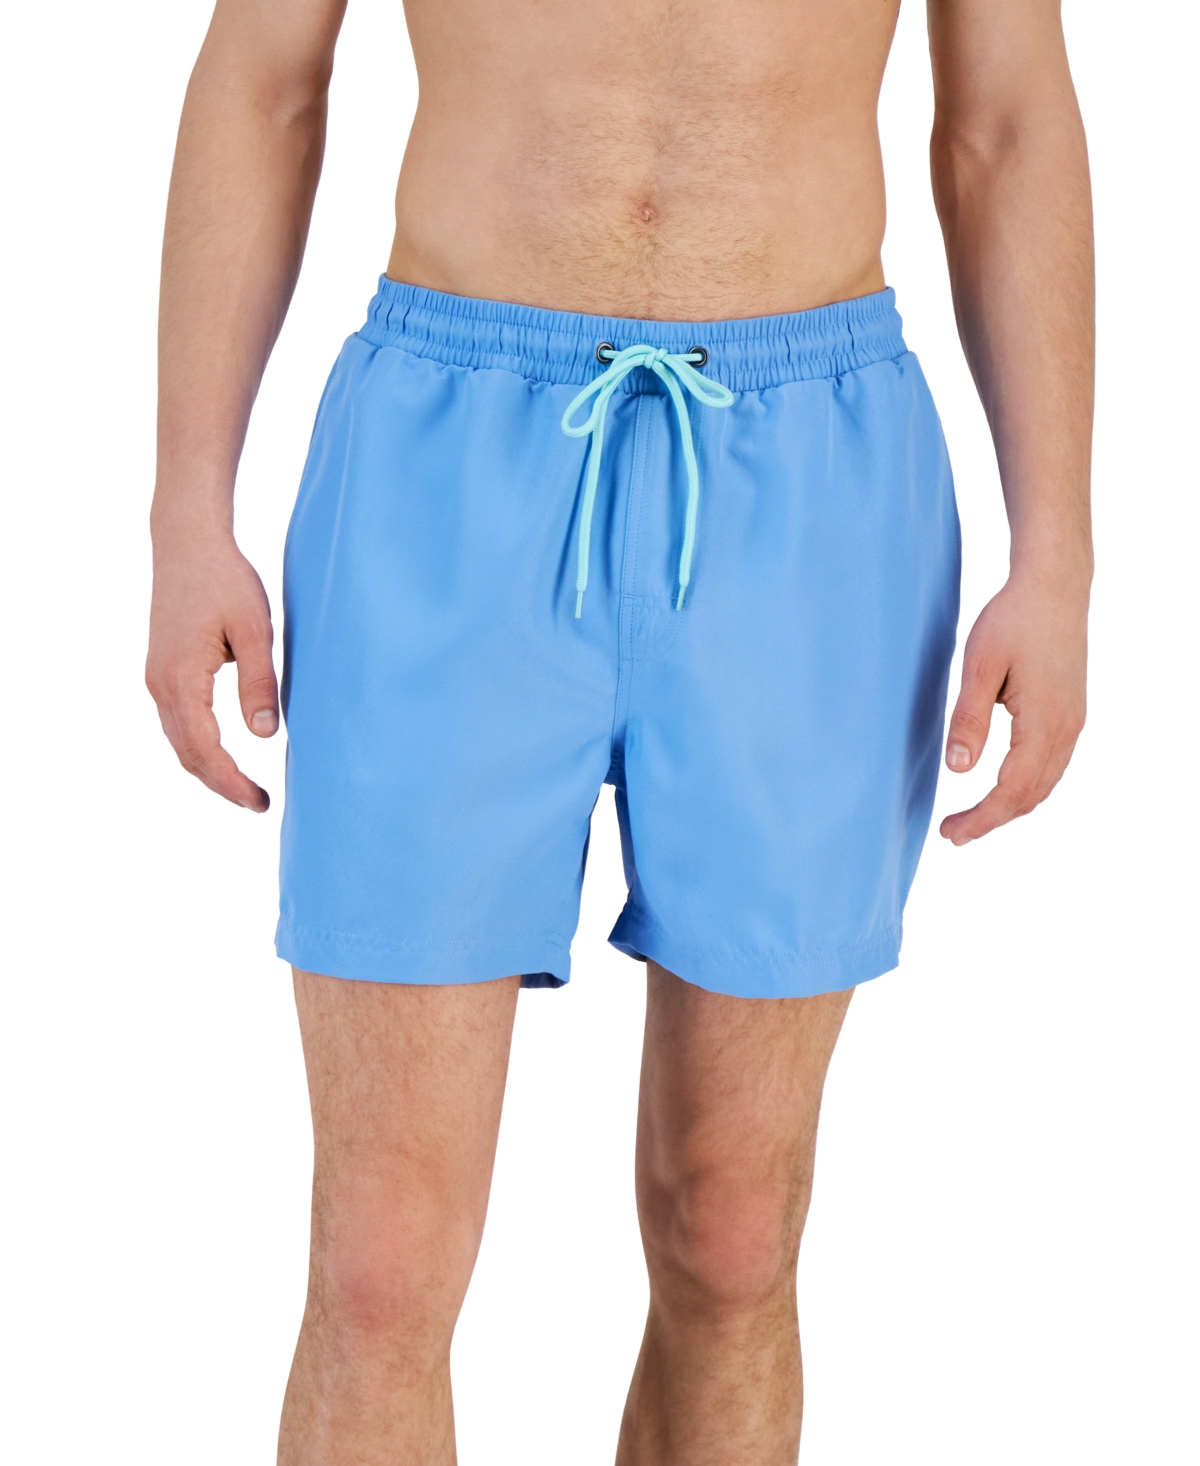 CLUB ROOM MEN'S QUICK-DRY PERFORMANCE SOLID 5" SWIM TRUNKS, CREATED FOR MACY'S